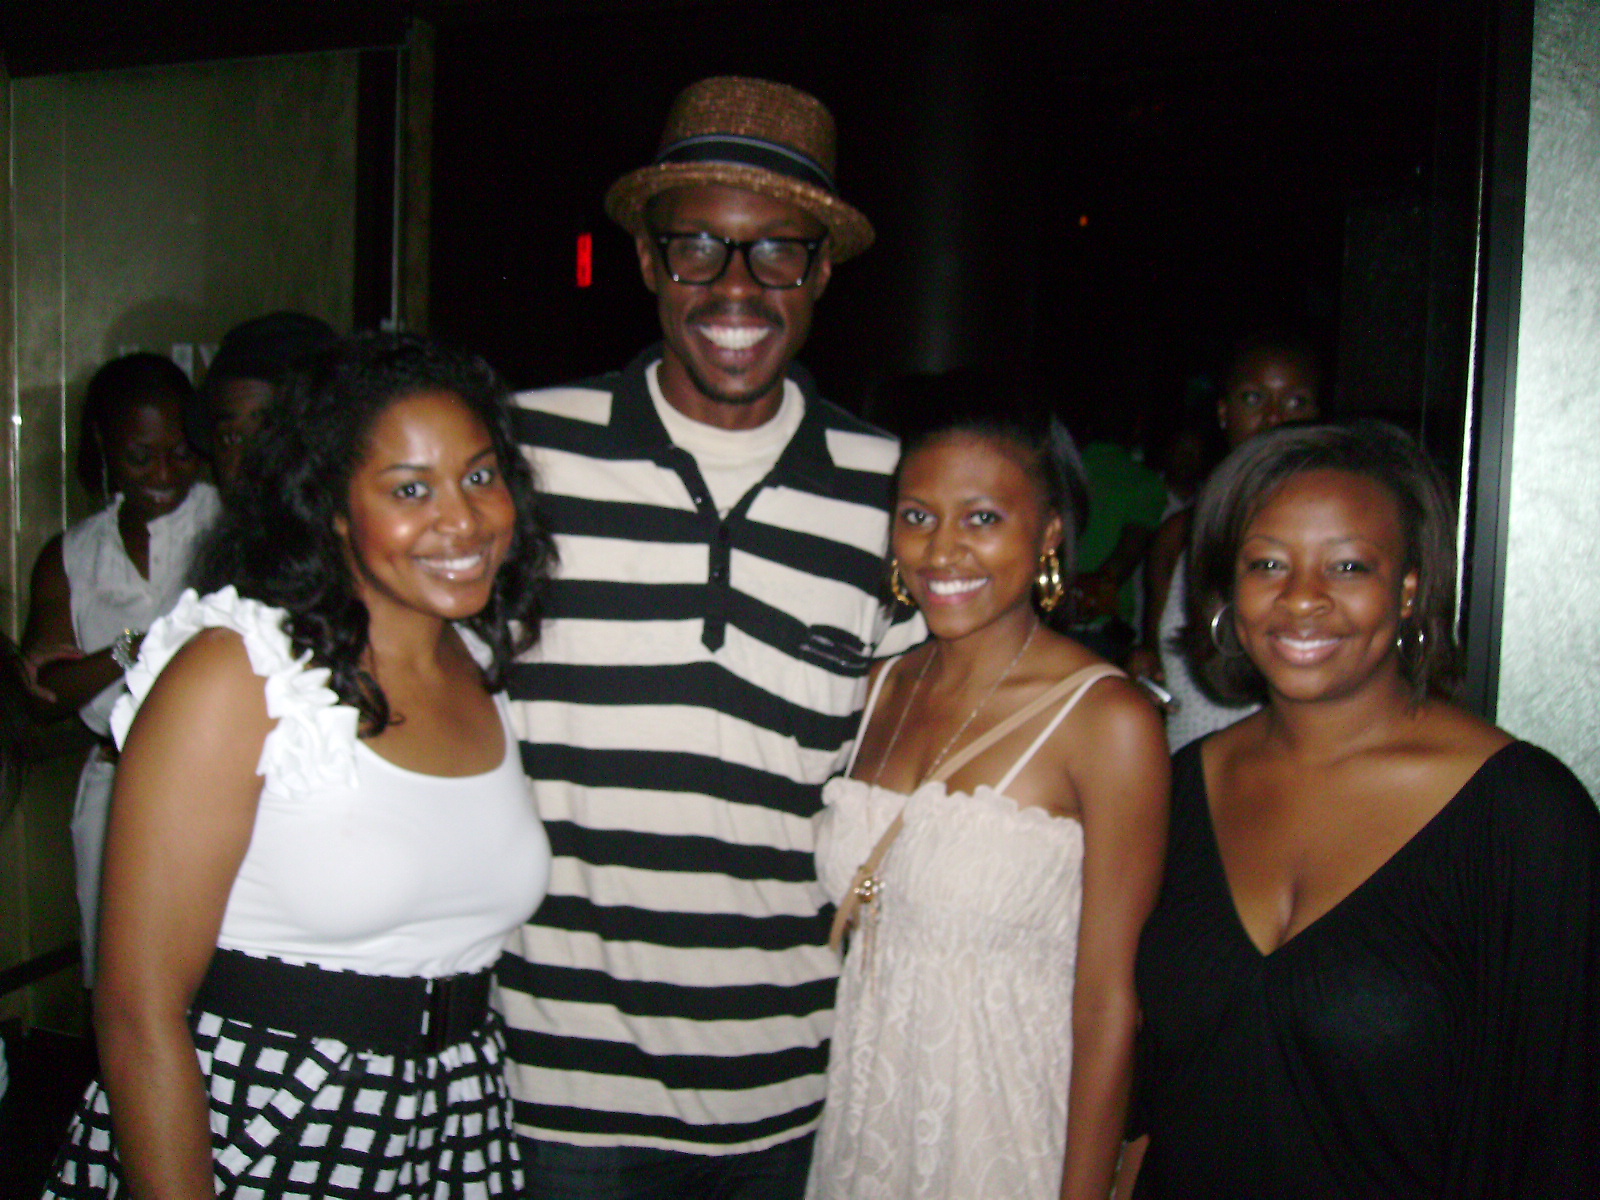 At the American Black Film Festival (ABFF) with the amazing Wood Harris